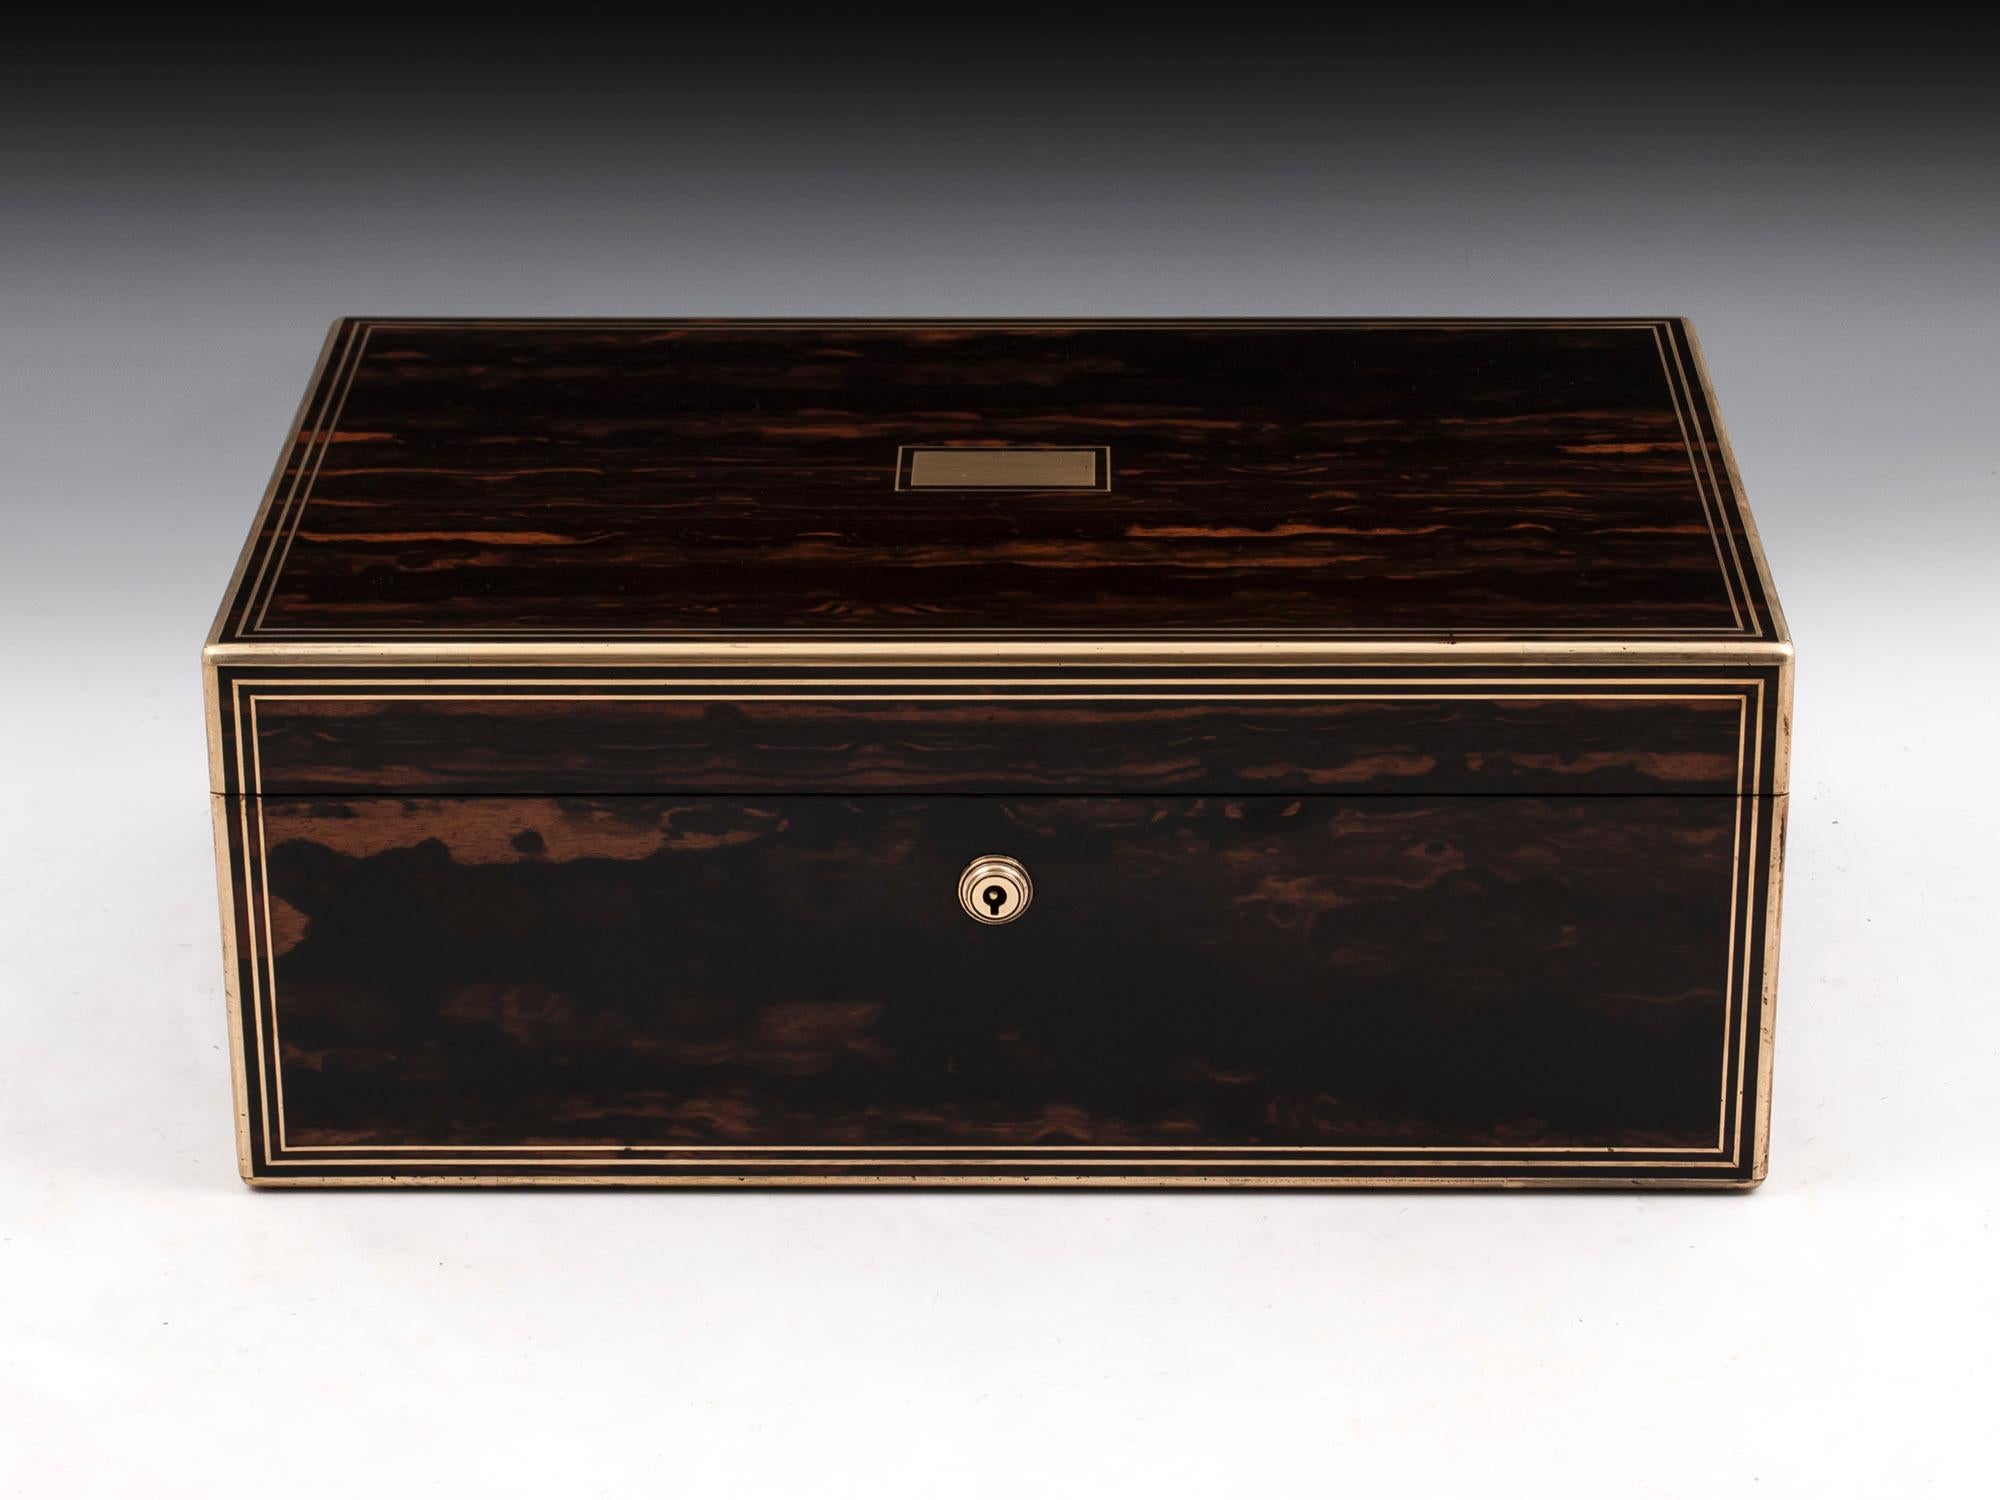 Antique coromandel and satinwood lined writing box by Lund of London, with brass edging and double stringing. With vacant initial plate and escutcheon.

The satinwood lined interior features a black gold tooled leather writing surface which has